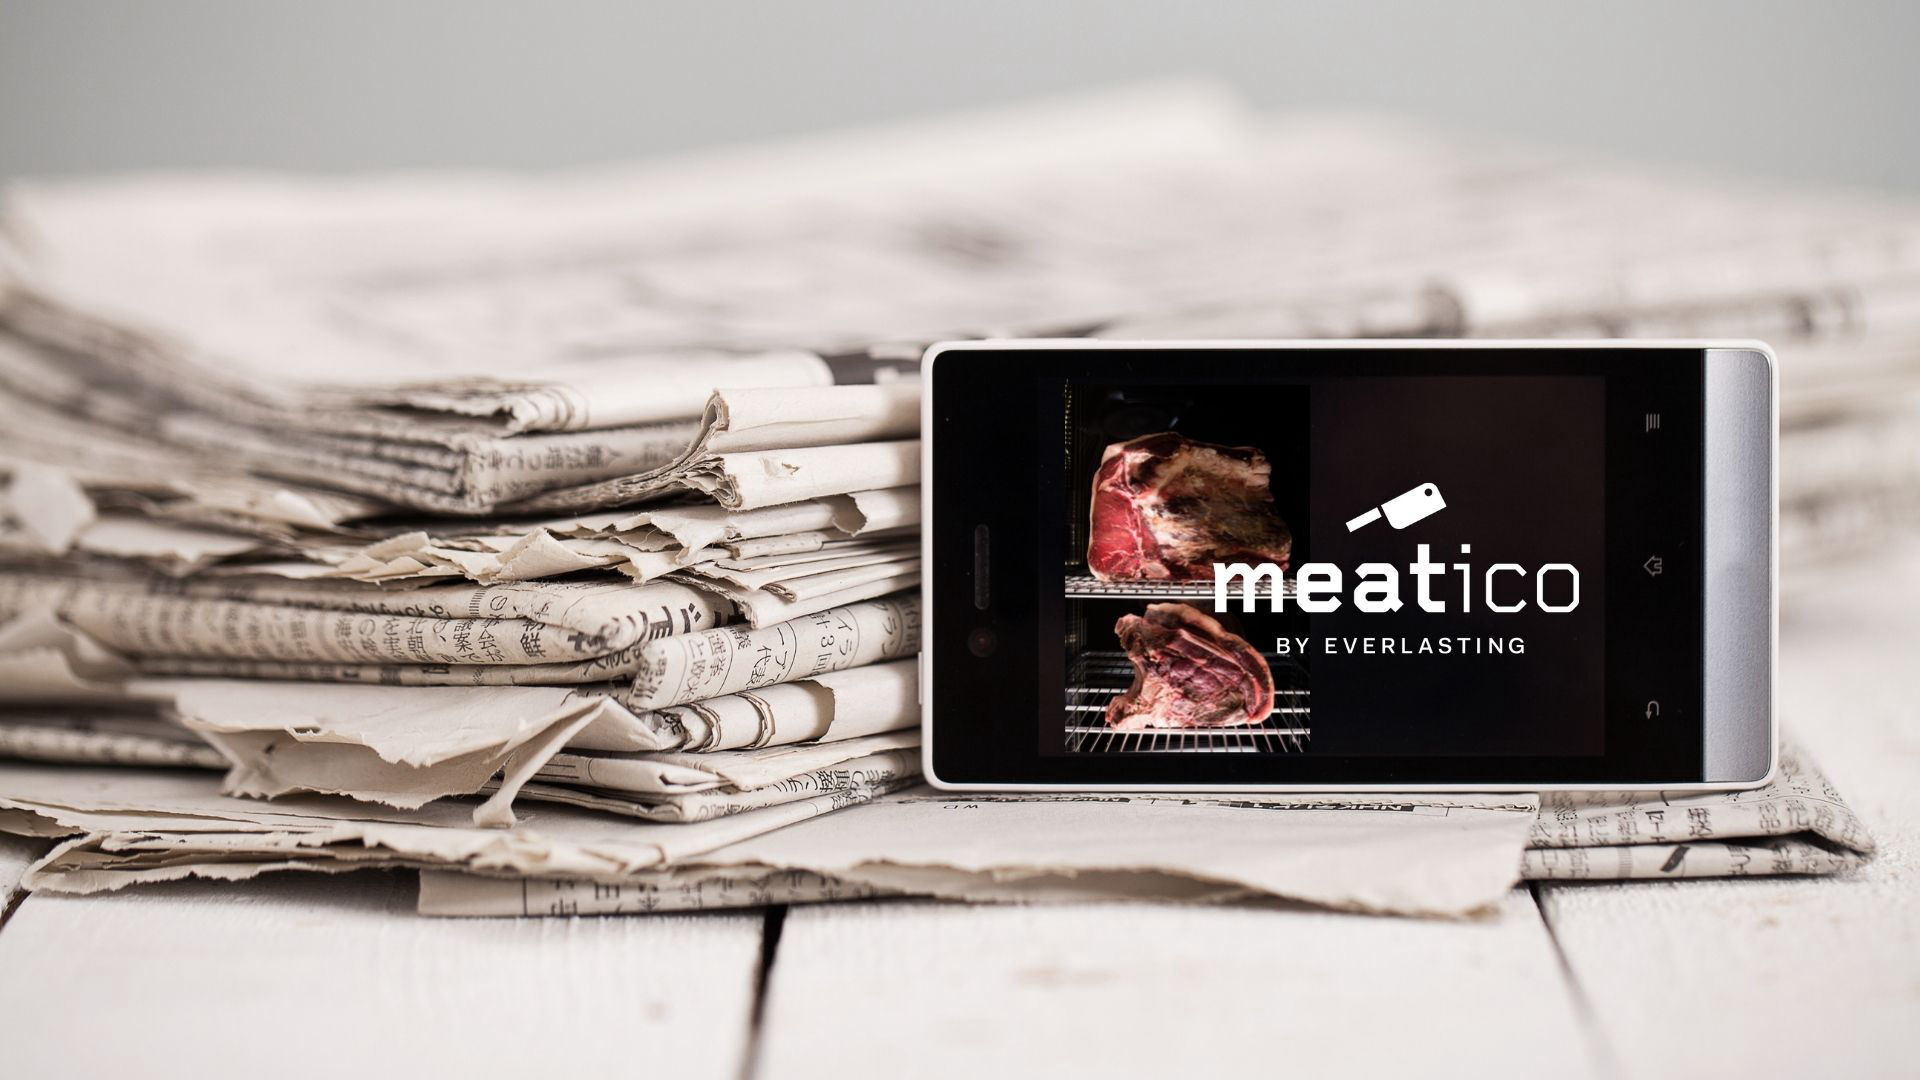 Meatico by Everlasting